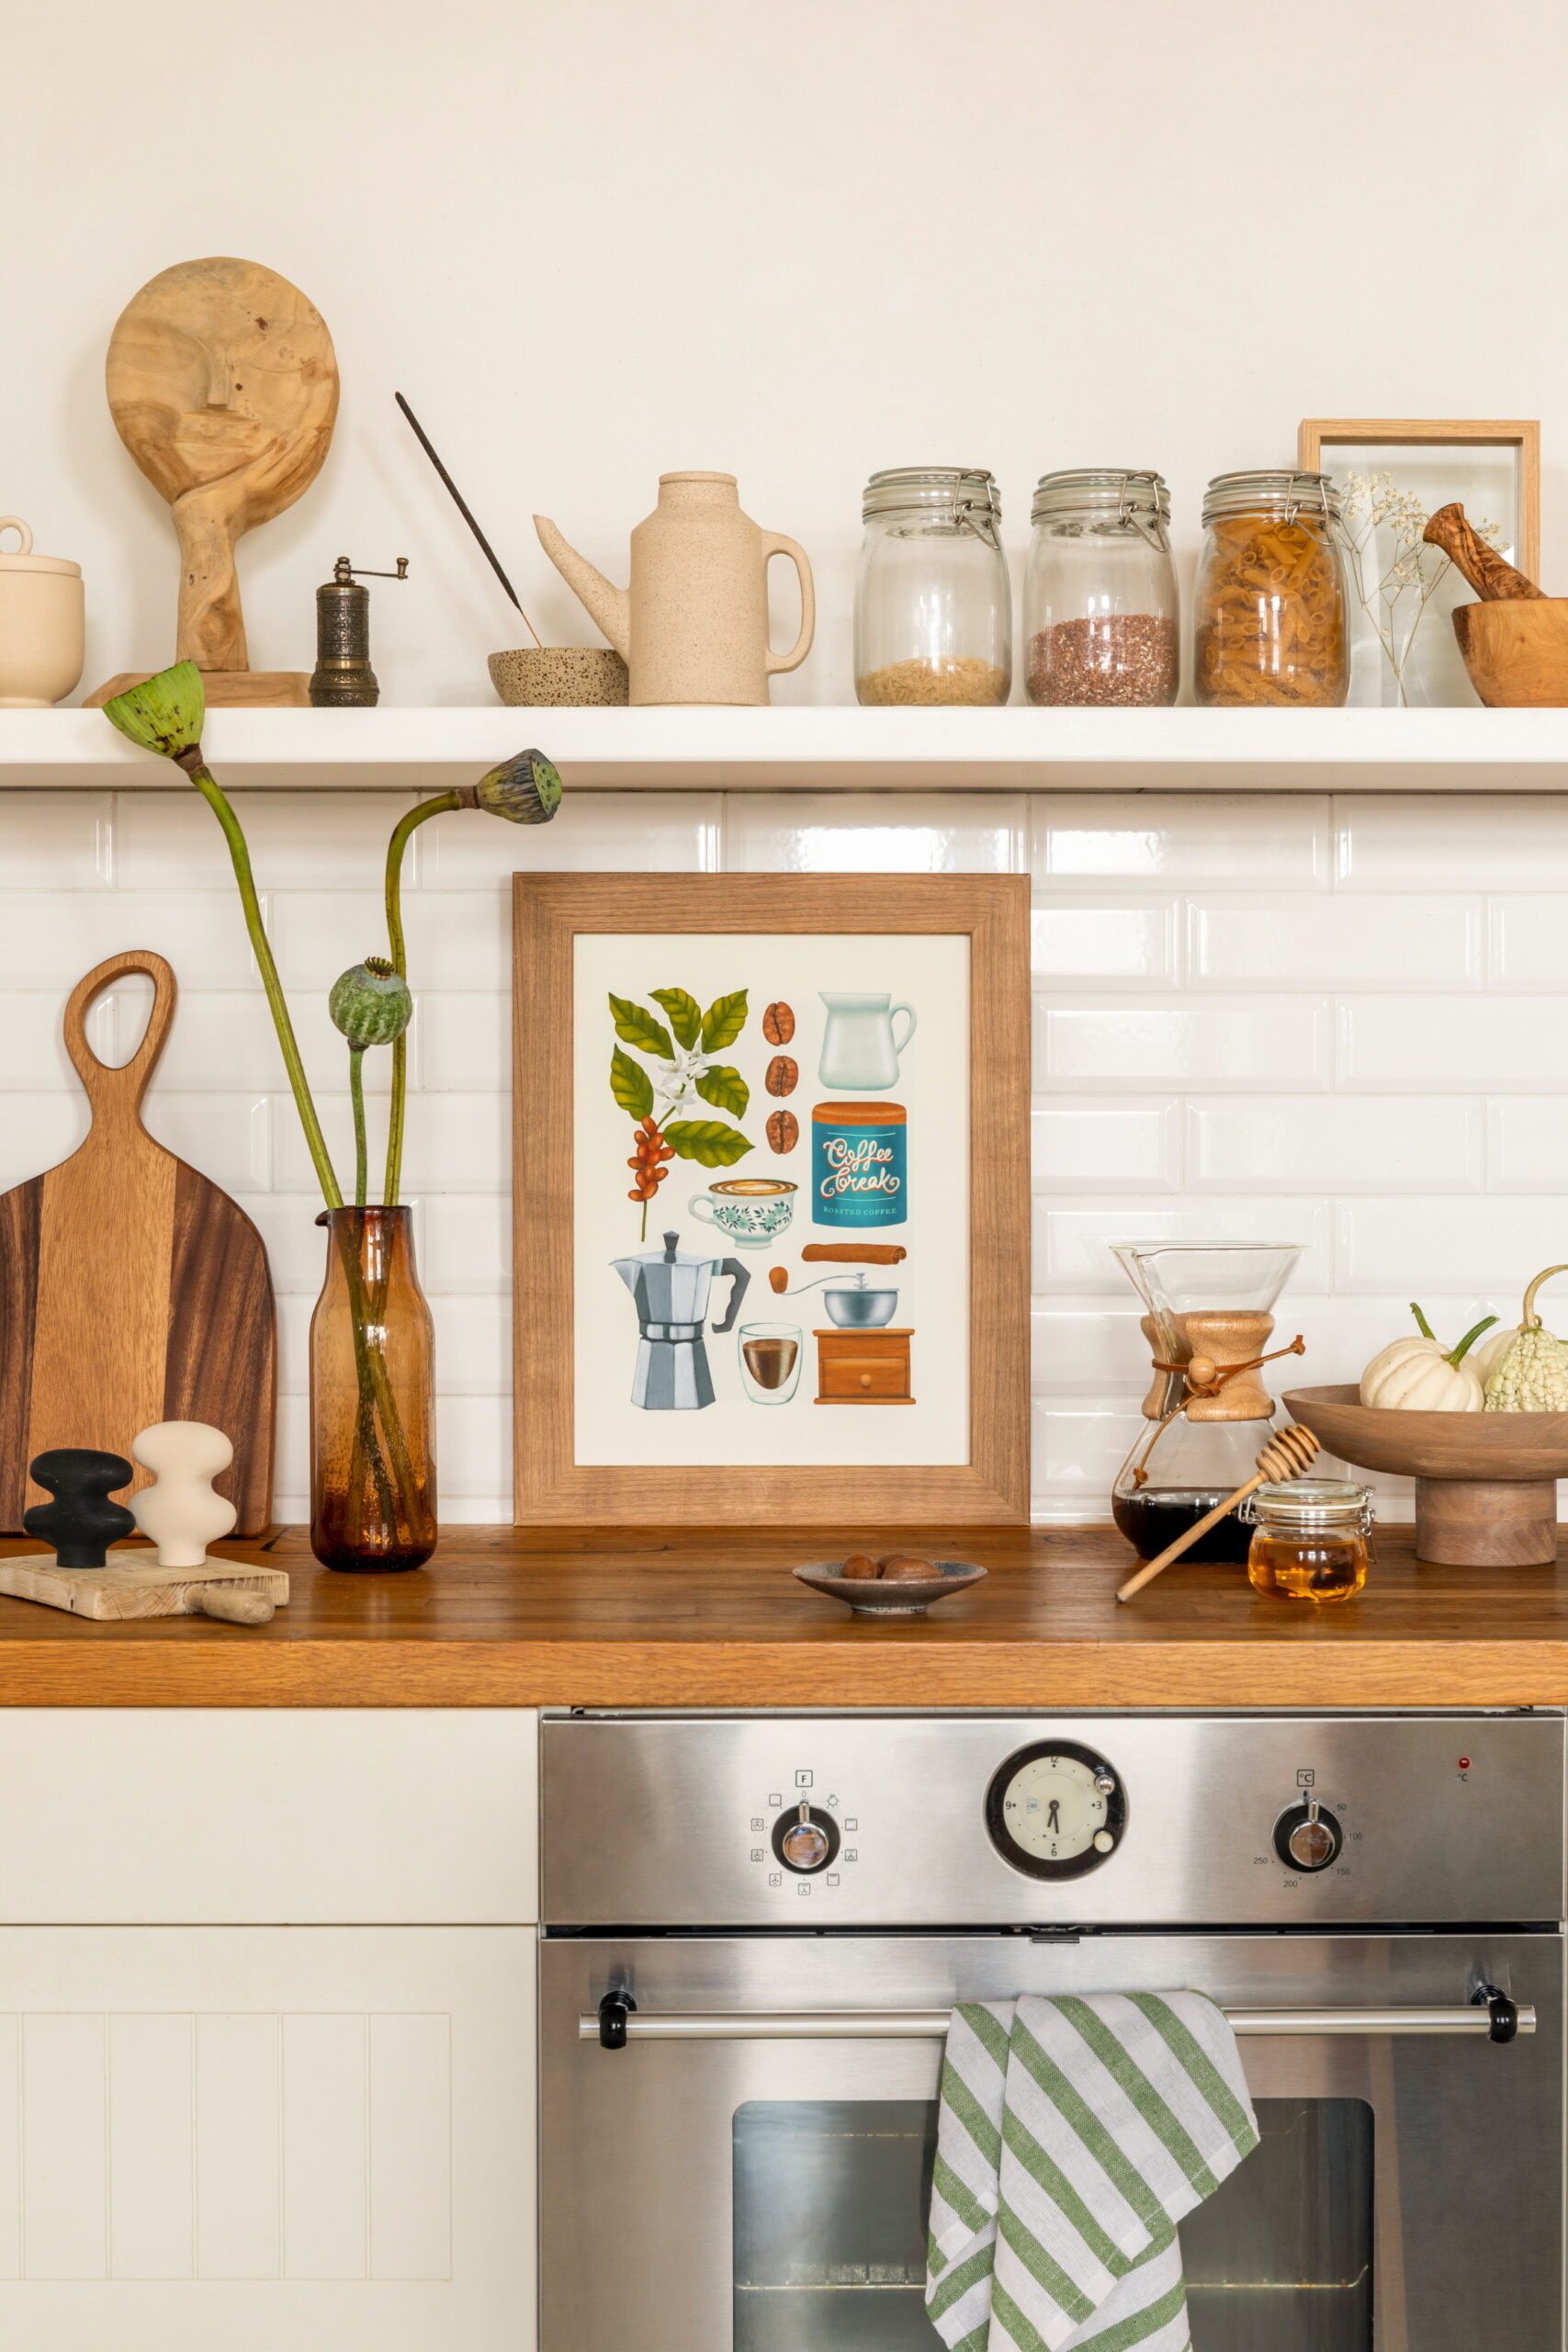 Maximize small spaces with corner shelves for pantry items, plants, and decorative displays.